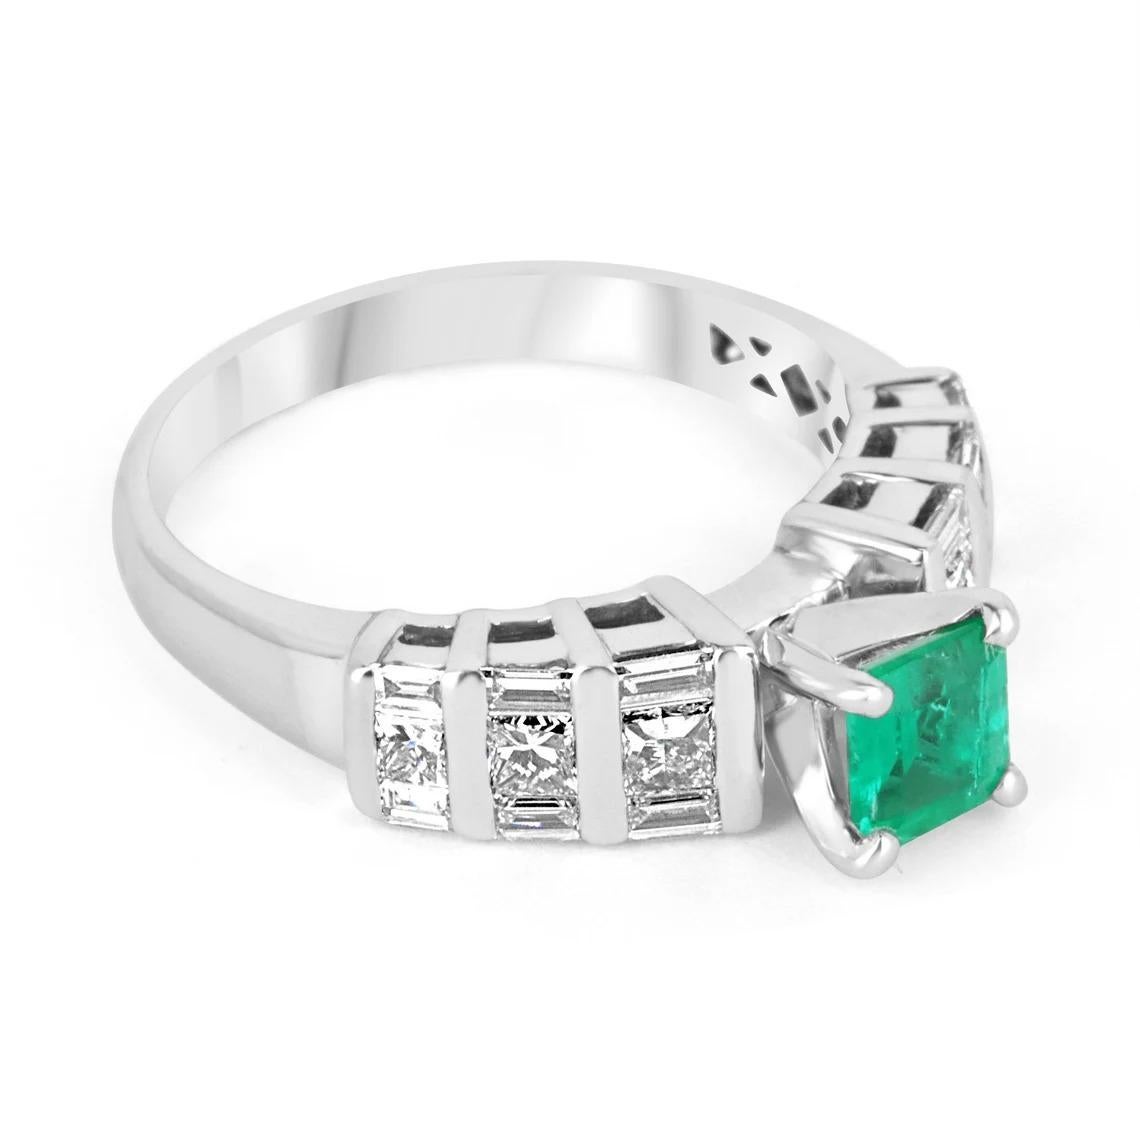 Featured here is a classic emerald and diamond engagement ring. Expertly handcrafted in gleaming 14K white gold; this ring features one fine quality emerald in a four-prong setting. The center is an extraordinary gemstone and has profound color